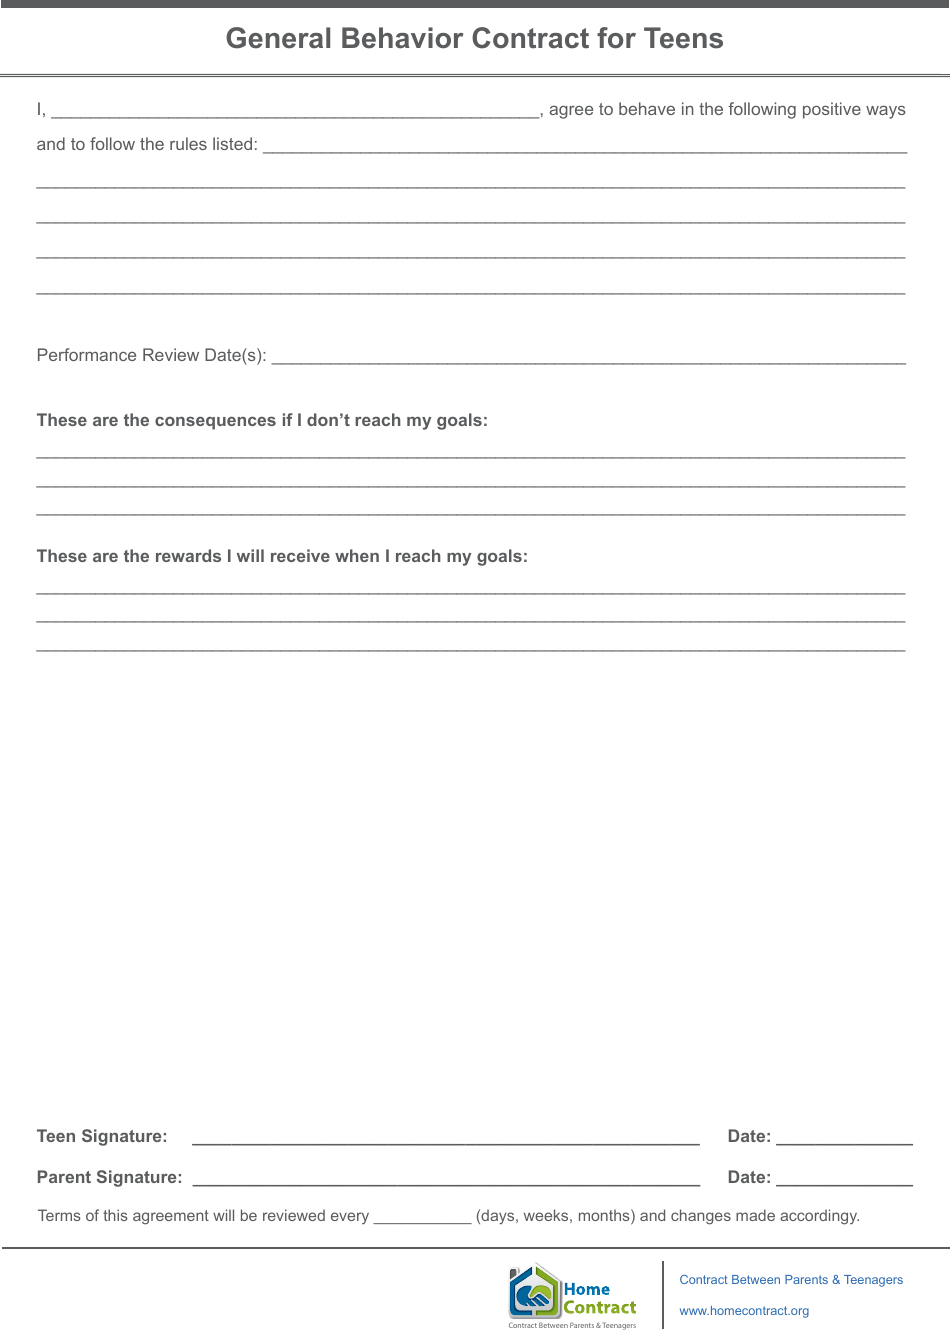 General Behavior Contract for Teens Template - Contract Between Parents  Teenagers - Home Contract, Page 1